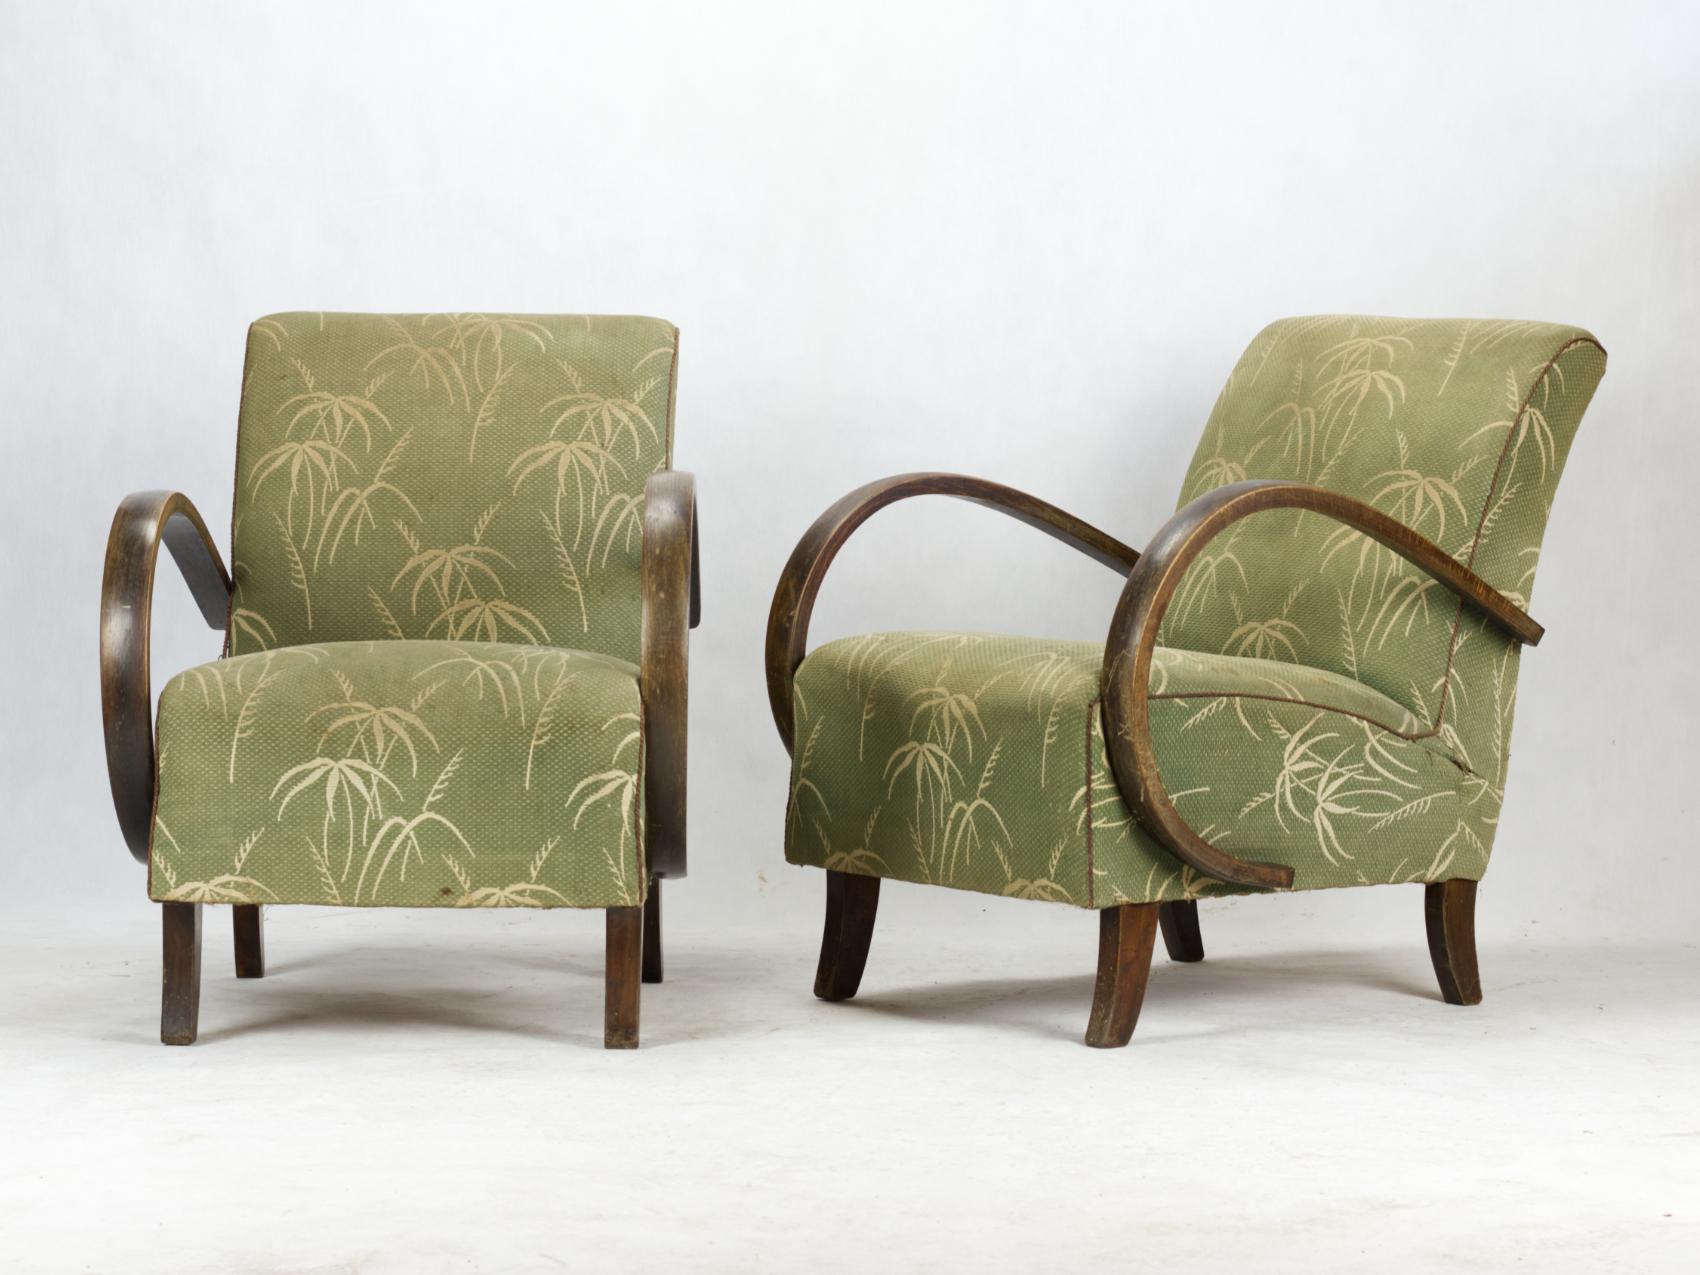 This lounge chairs, model C, were designed by Jindrich Halabala and produced in former Czechoslovakia in the 1930s by UP Zavody Brno. The the chairs are in their original condition and will require new upholstery.